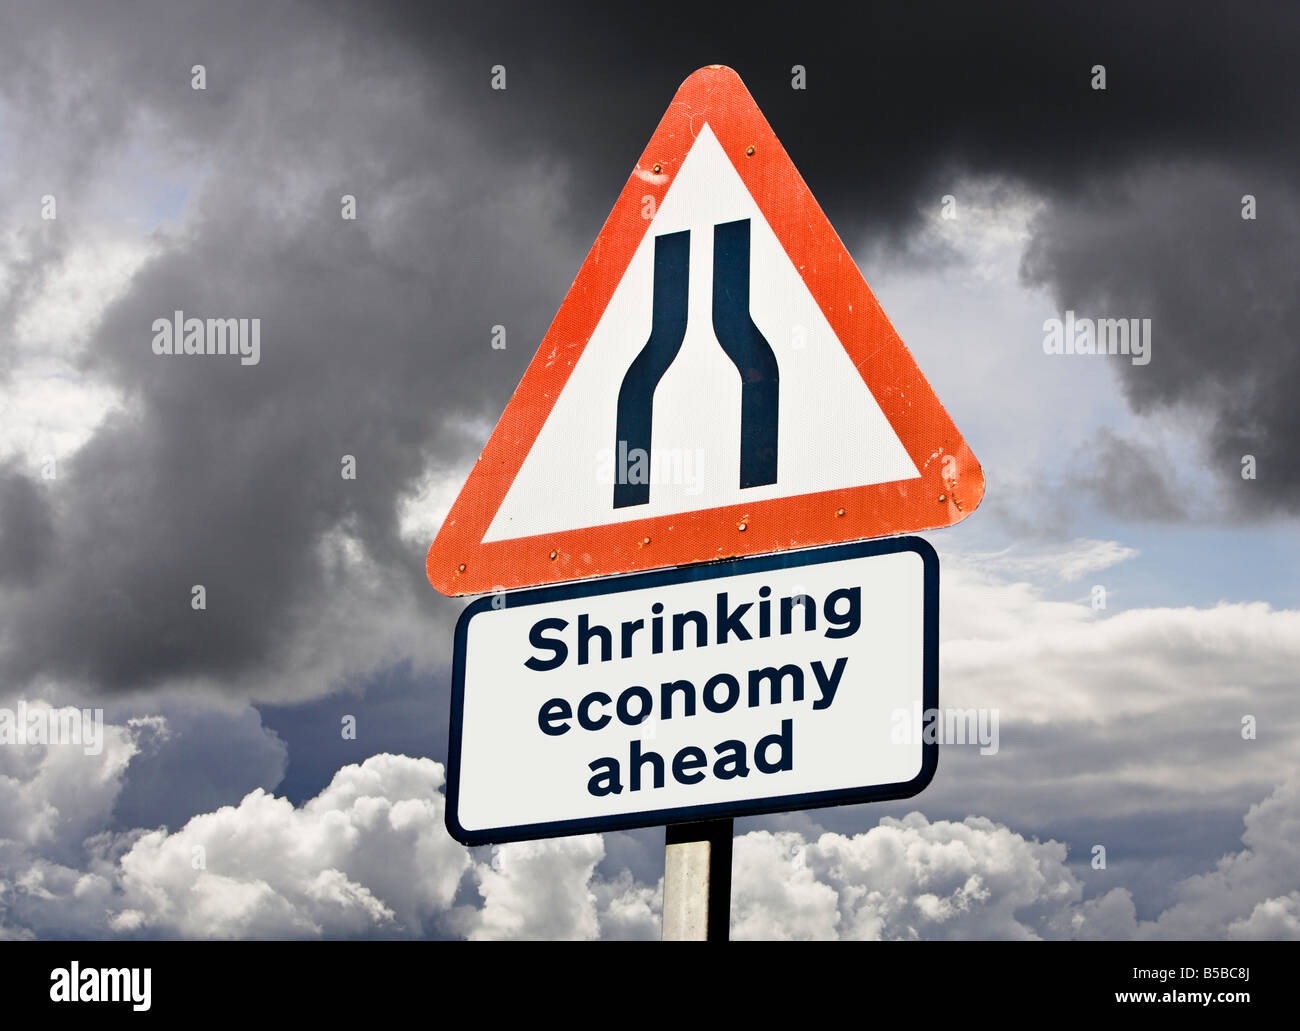 Shrinking economy - productivity / debt / output / low growth concept sign UK against a stormy sky Stock Photo